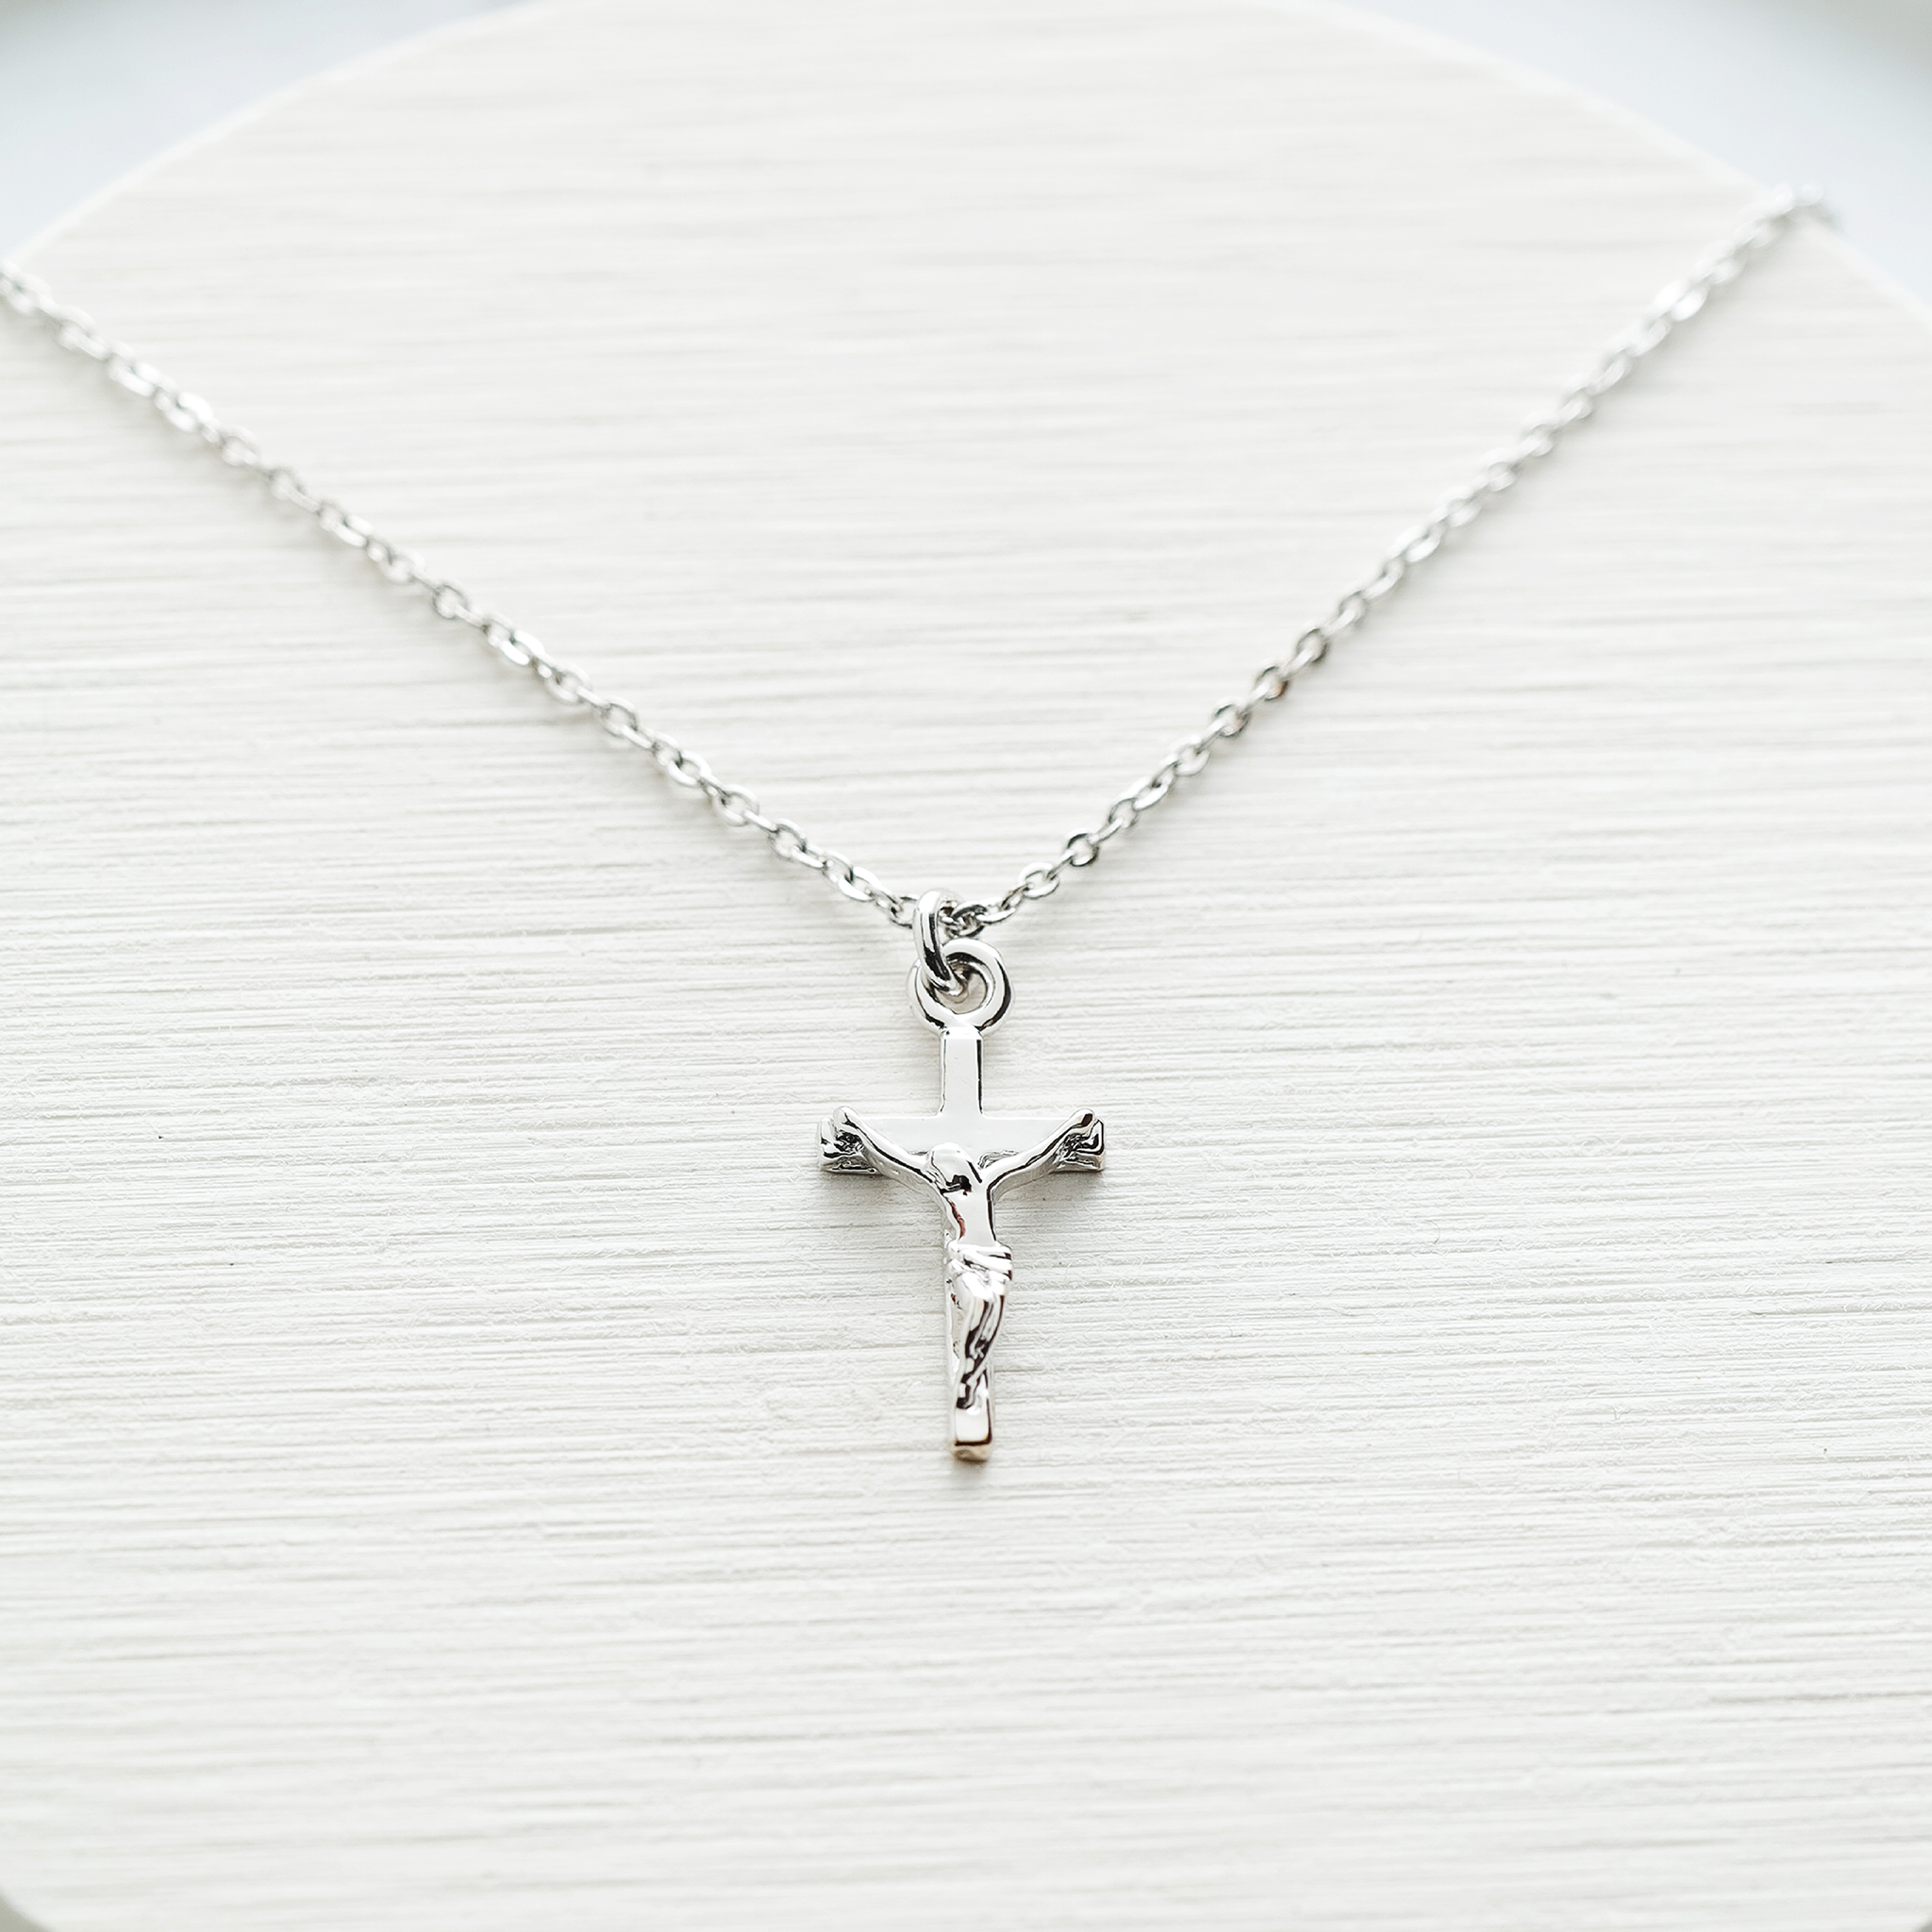 RHODIUM-PLATED CRUCIFIX PENDANT WITH STAINLESS STEEL CHAIN